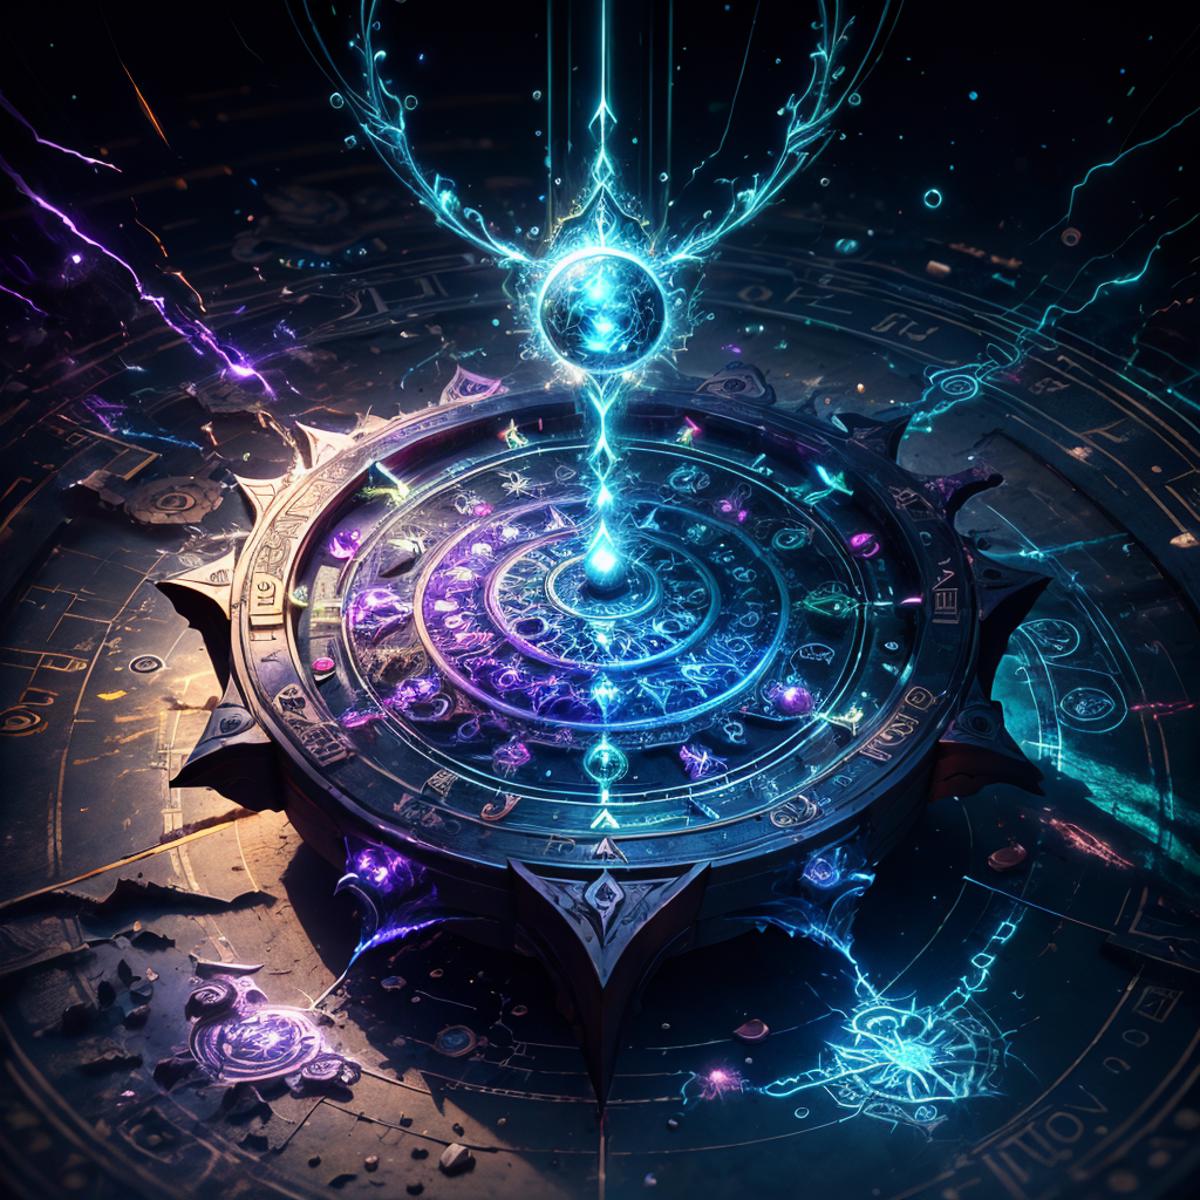 Ancient Celestial Blue and Purple Map with Lightning Bolts